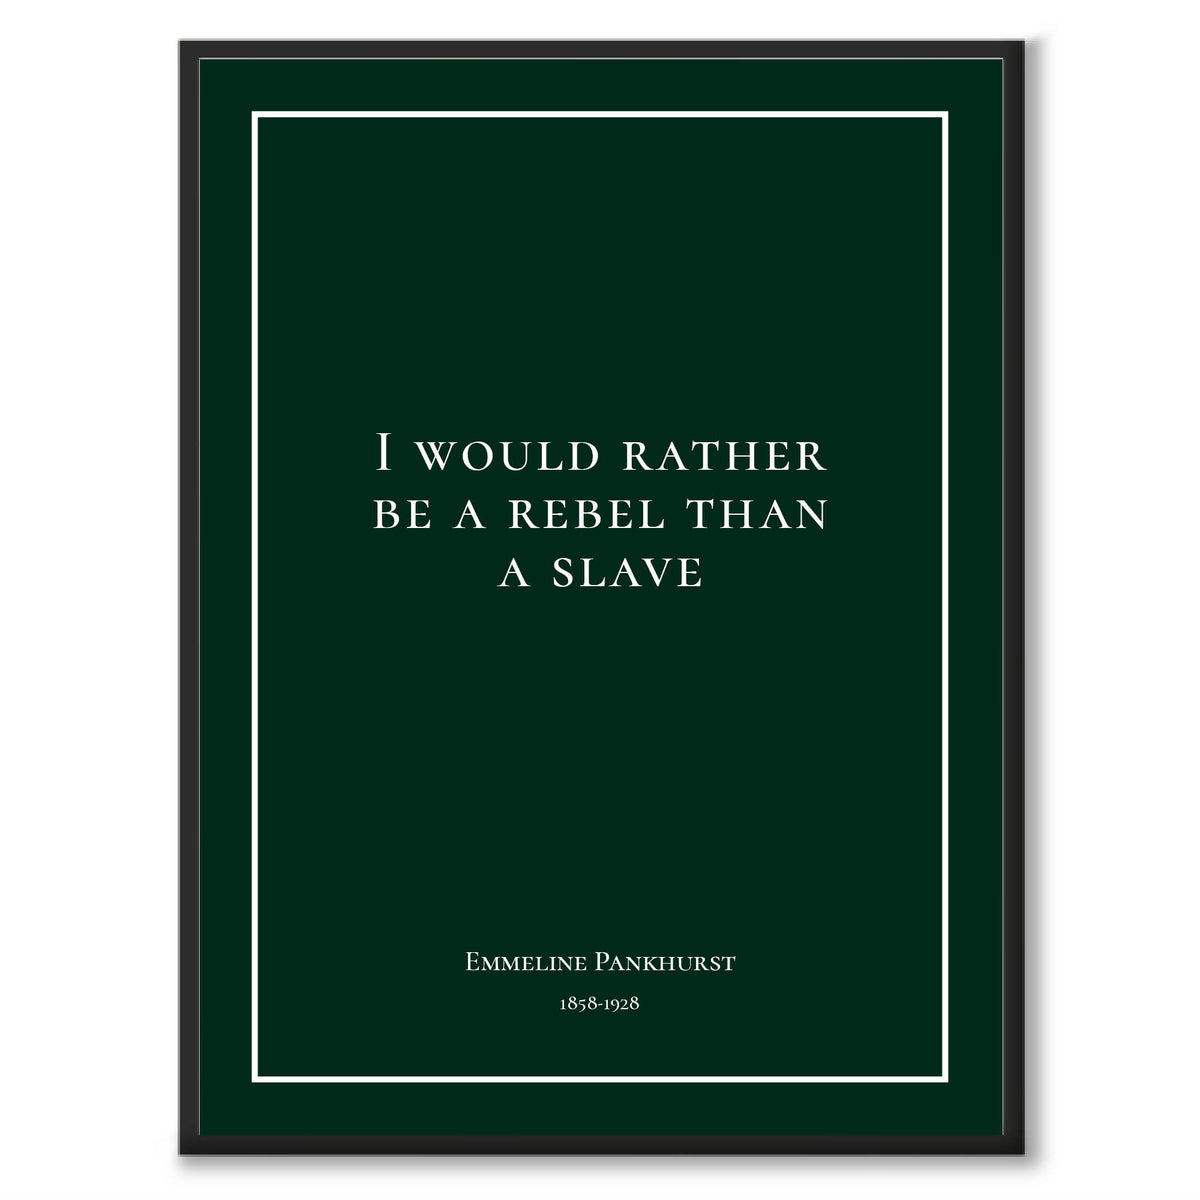 Pankhurst - I would rather be a rebel than a slave - Historly AB